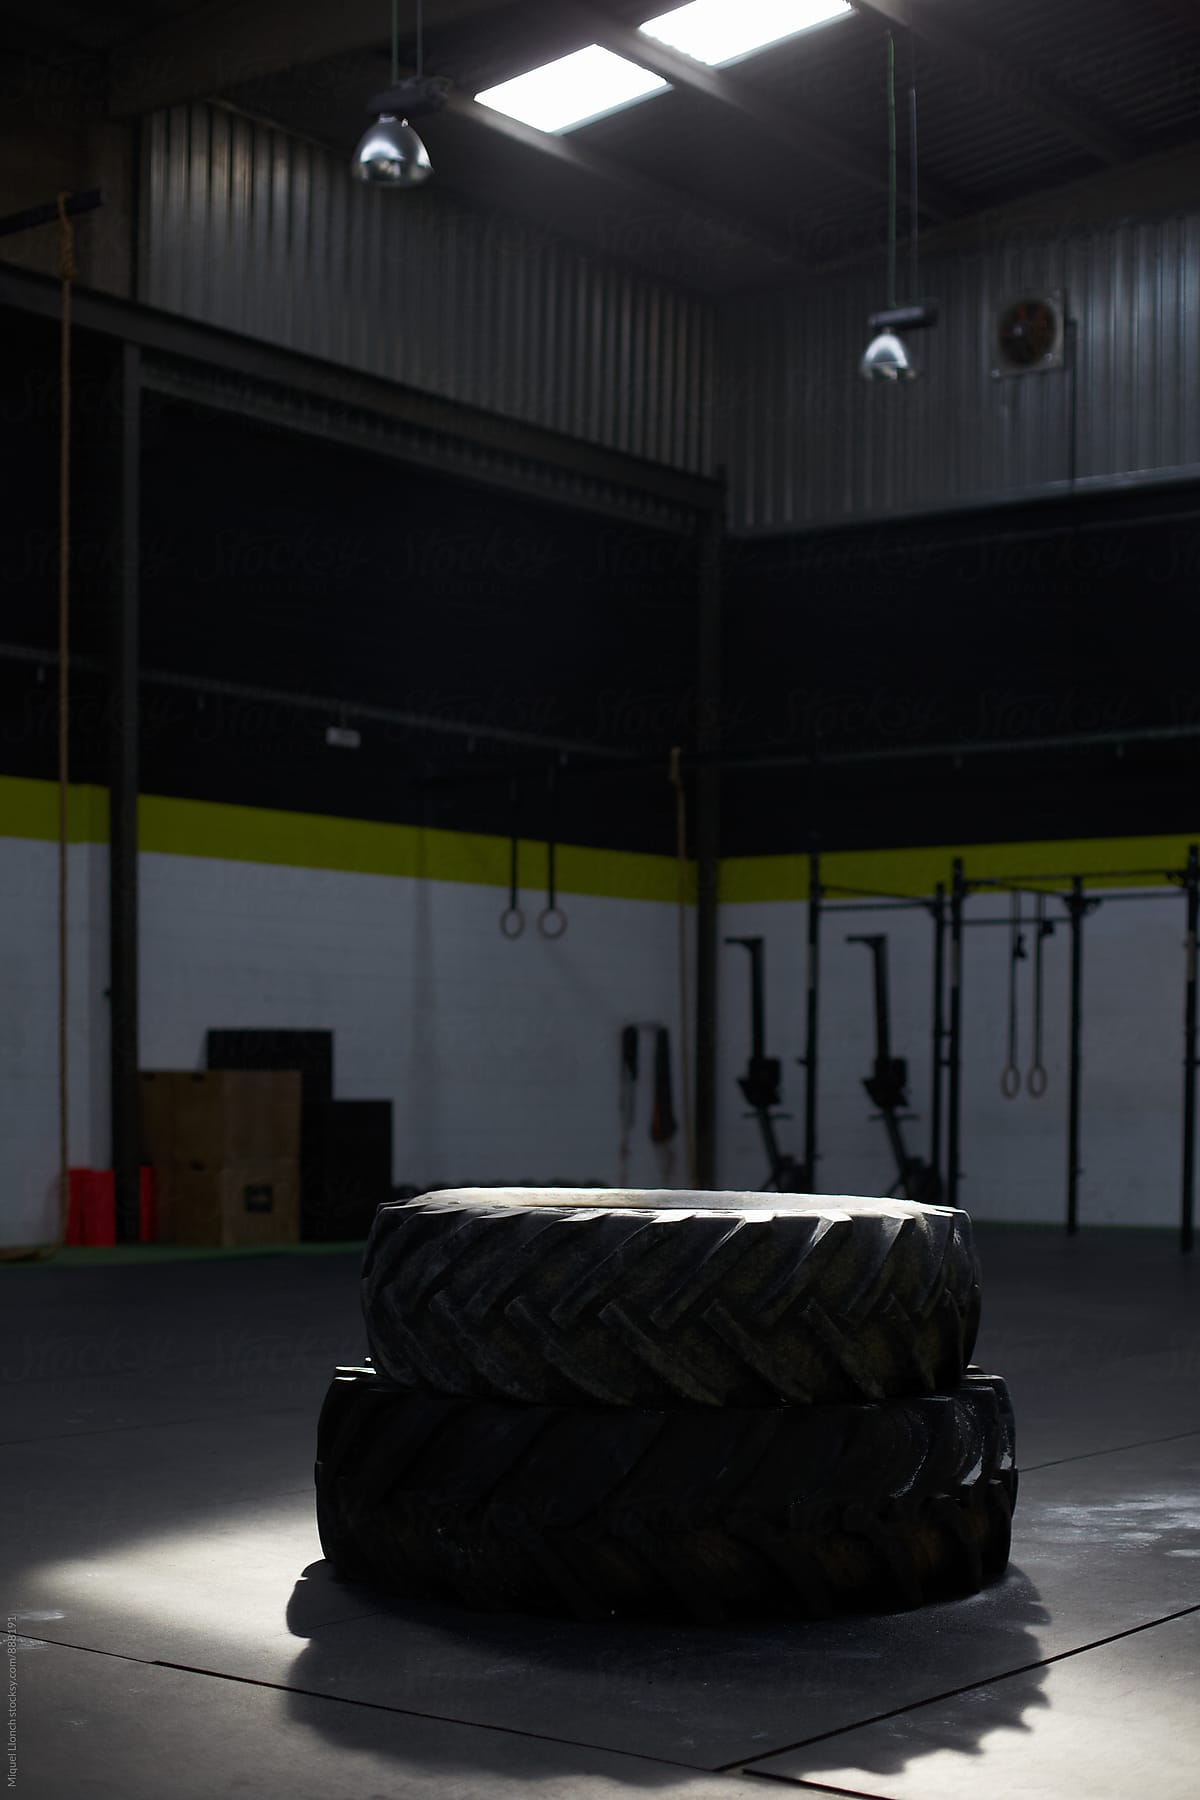 Gym space with two big tires for fitness workout